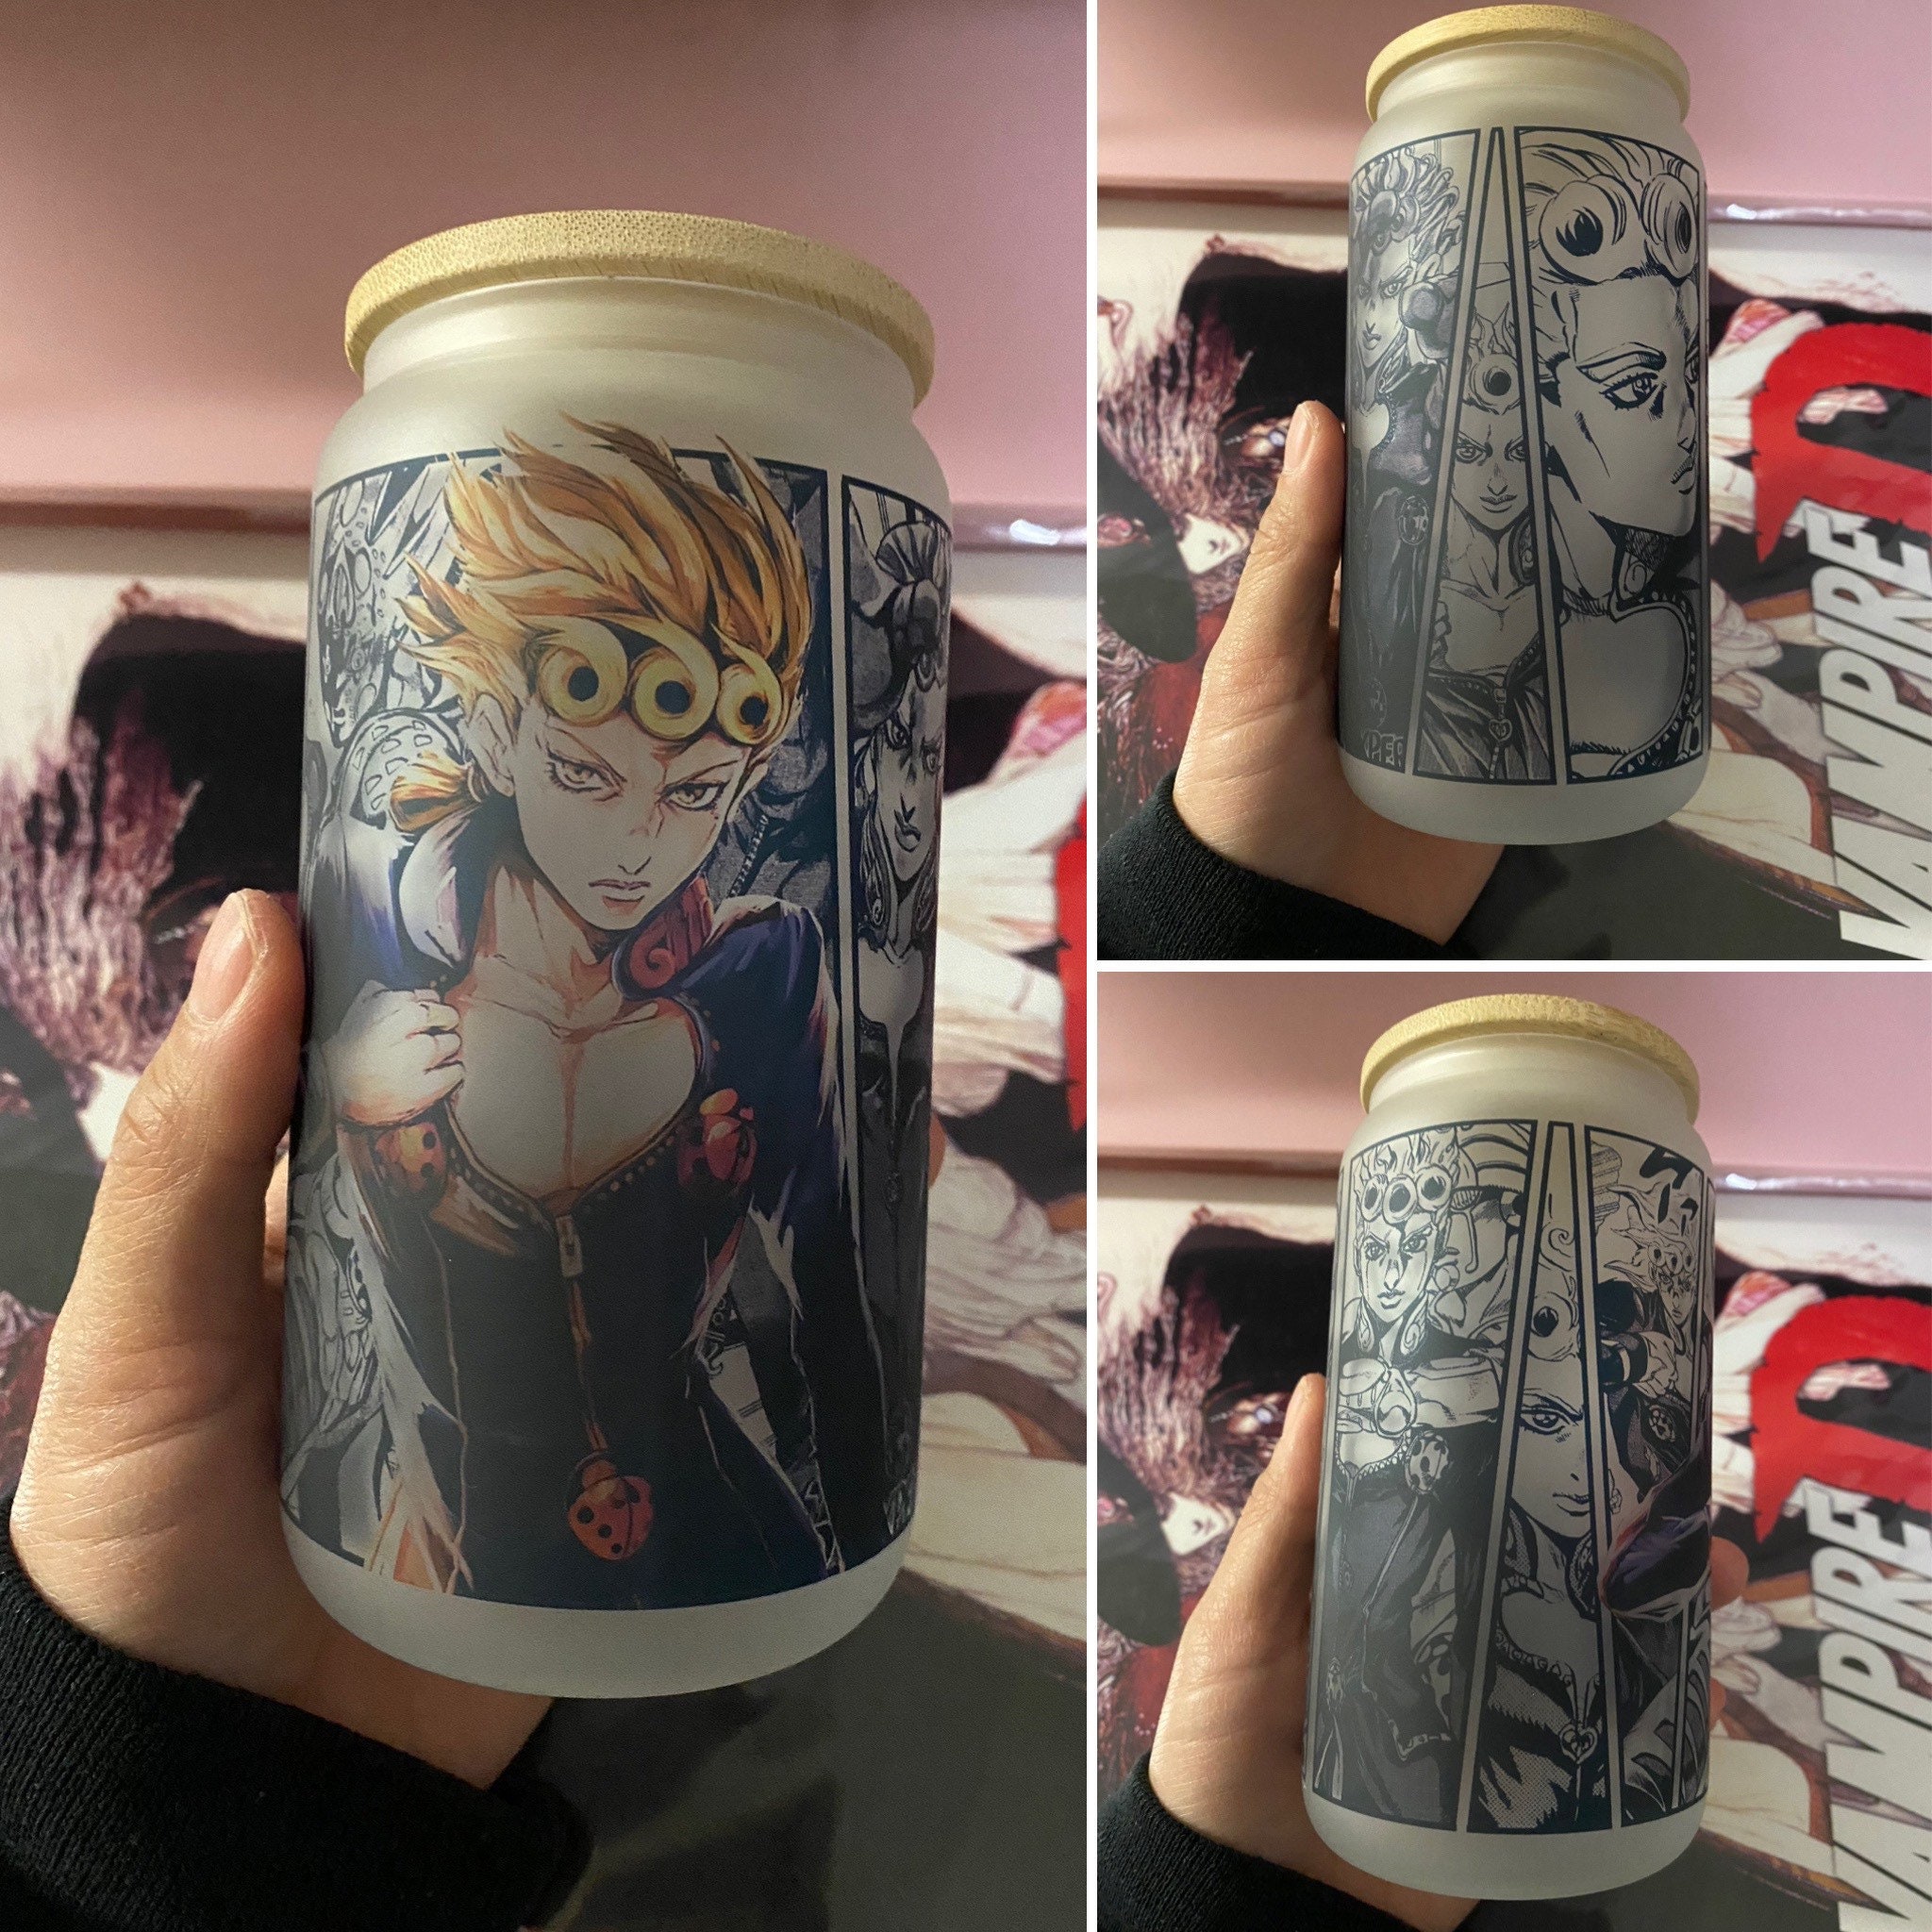 Handcrafted JoJo's Bizarre Adventure Inspired Anime on Manga Pages 20oz  Stainless Steel Tumbler 